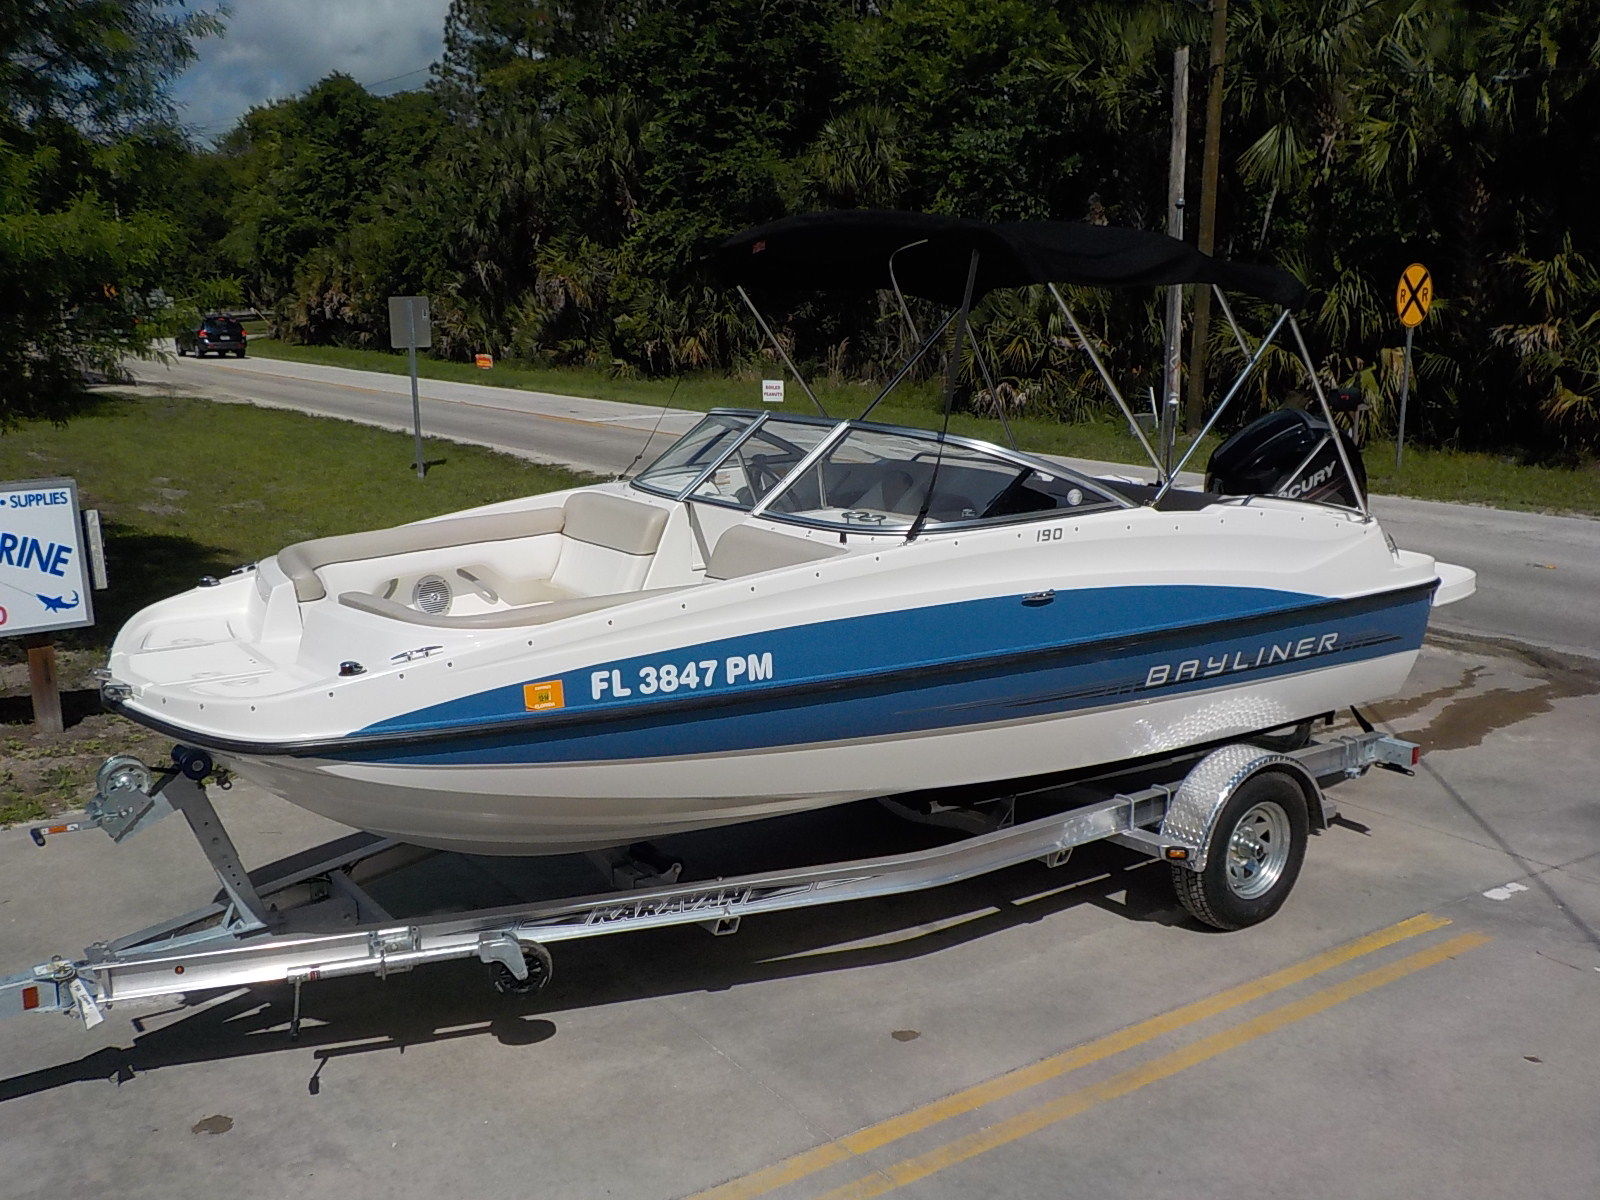 BAYLINER 190 DECK BOAT SERIES BOW RIDER FAMILY PLEASURE BOAT / 83 PICTURES